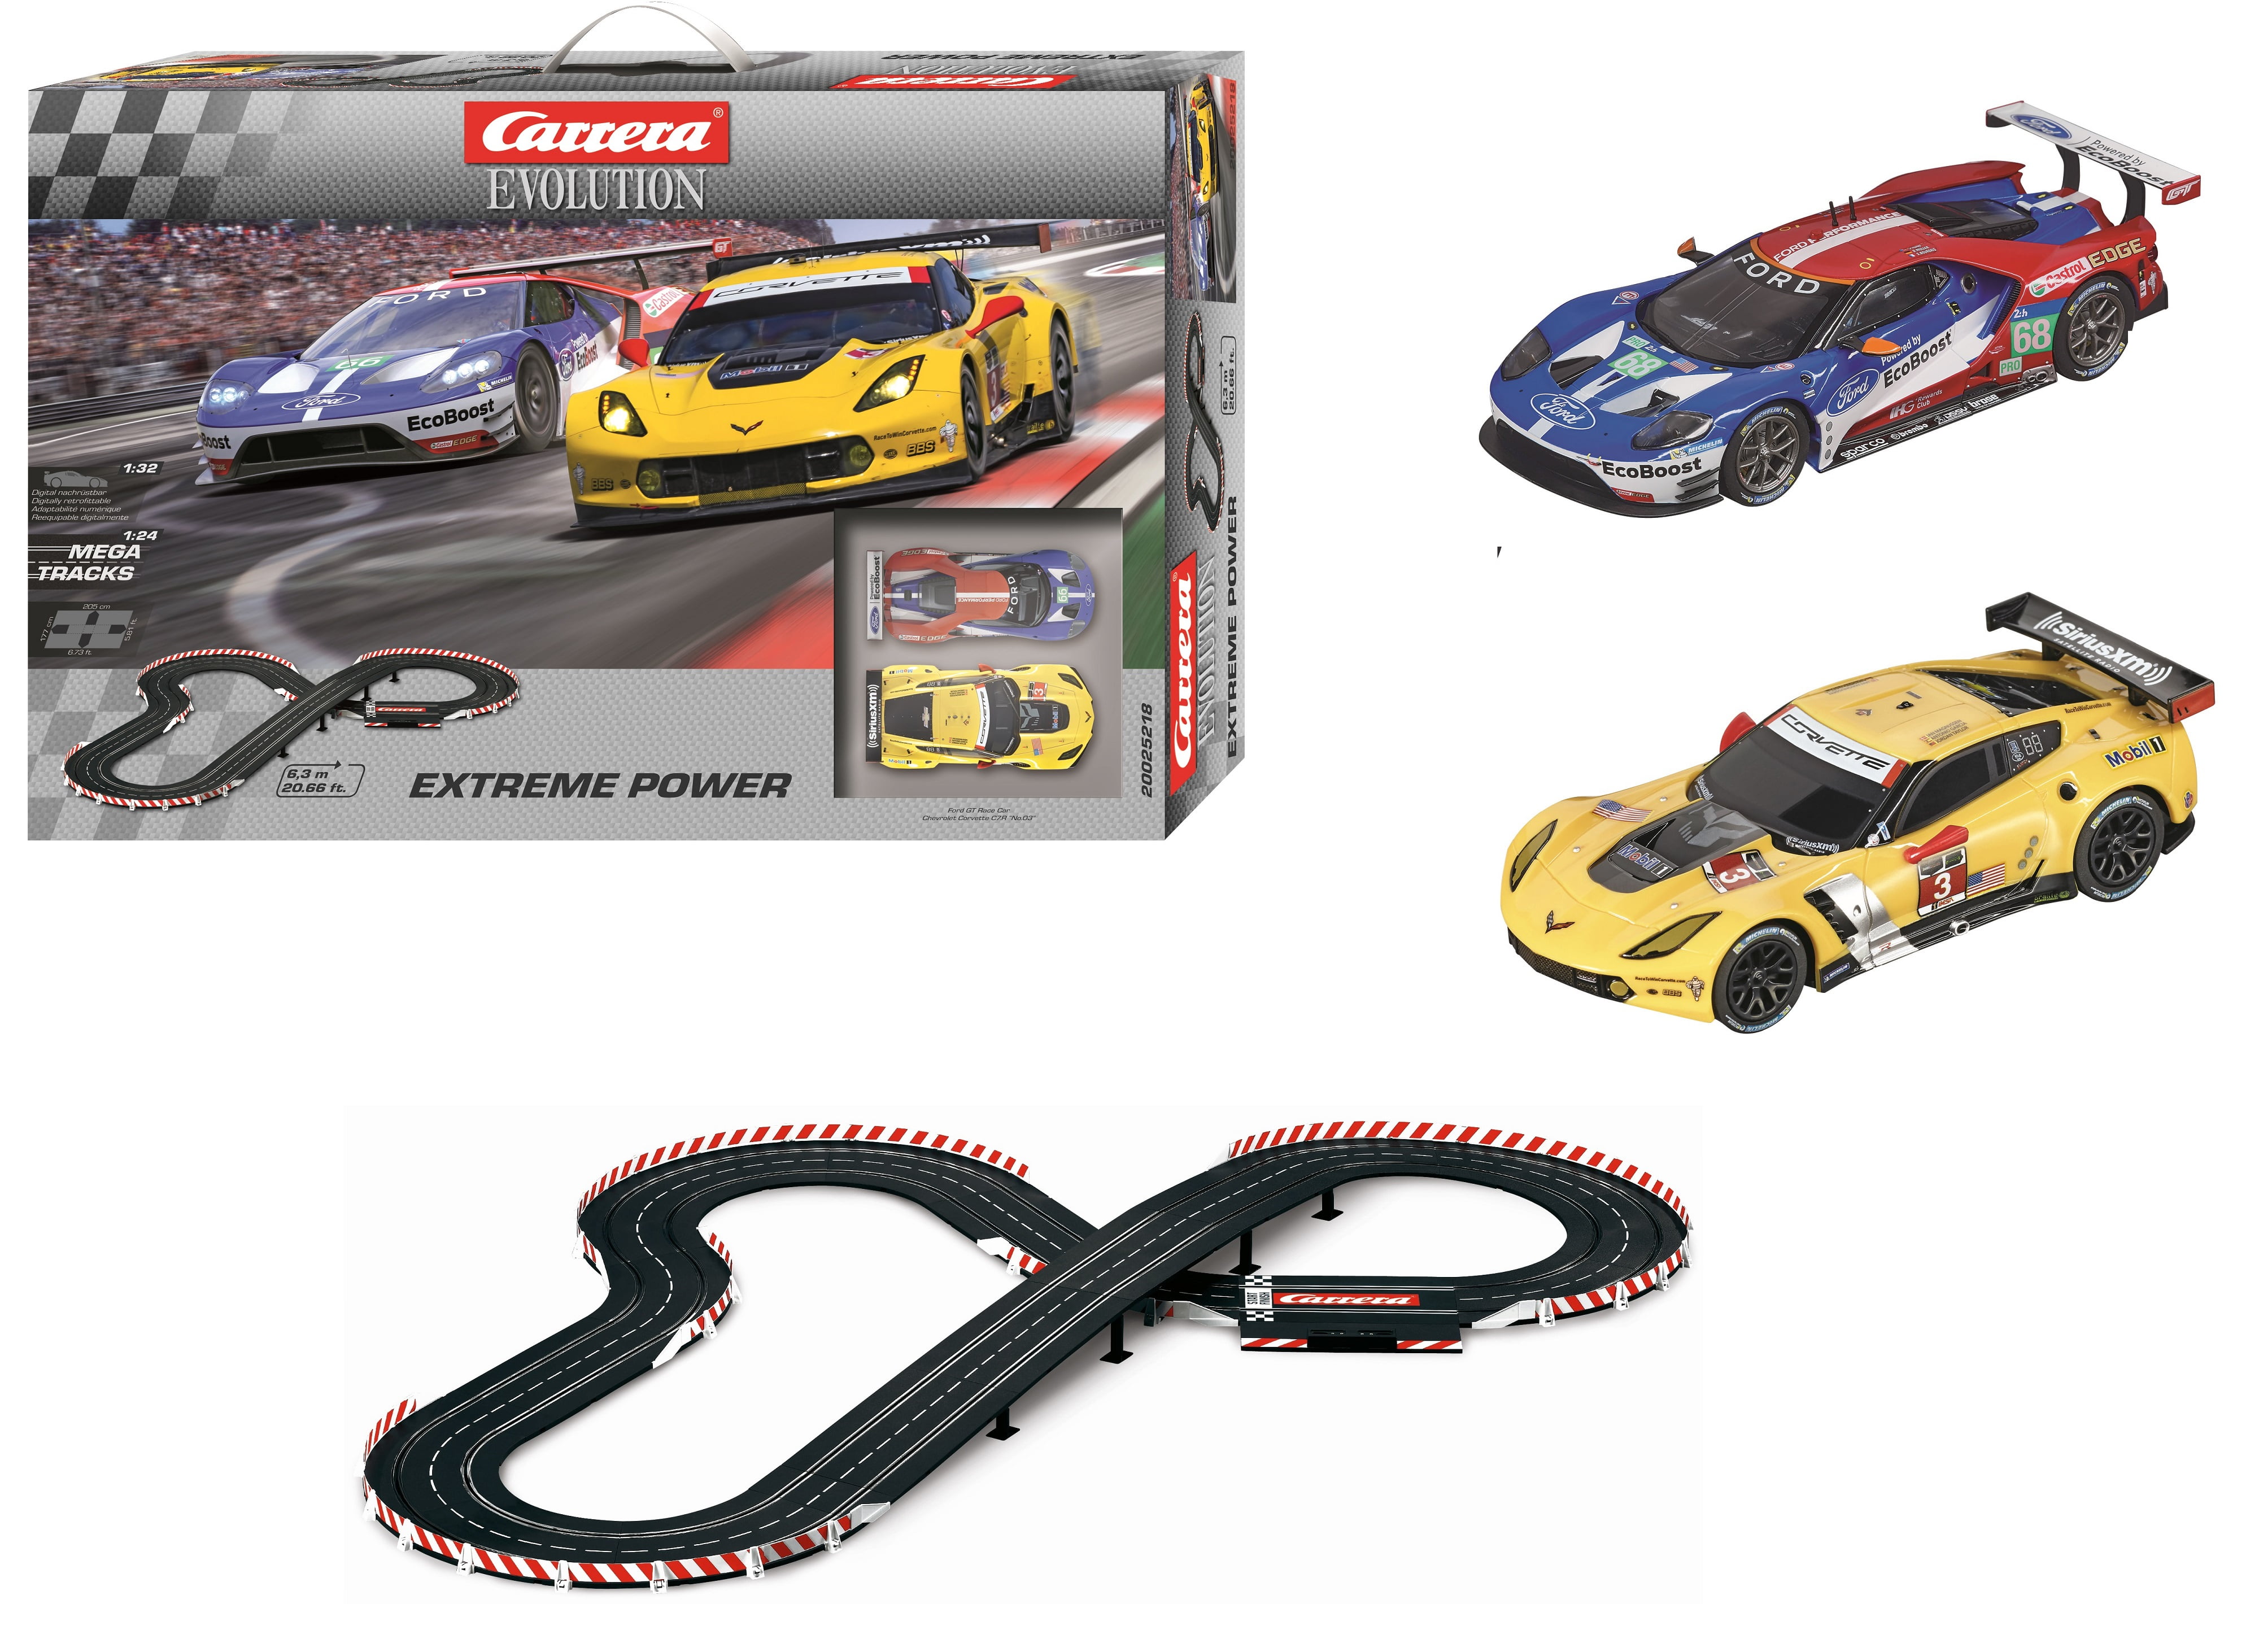 Carrera Evolution Extreme Power Slot Car Race Track Set featuring Ford GT  versus Chevrolet Camaro C7R 1:32 Scale Racing Cars 